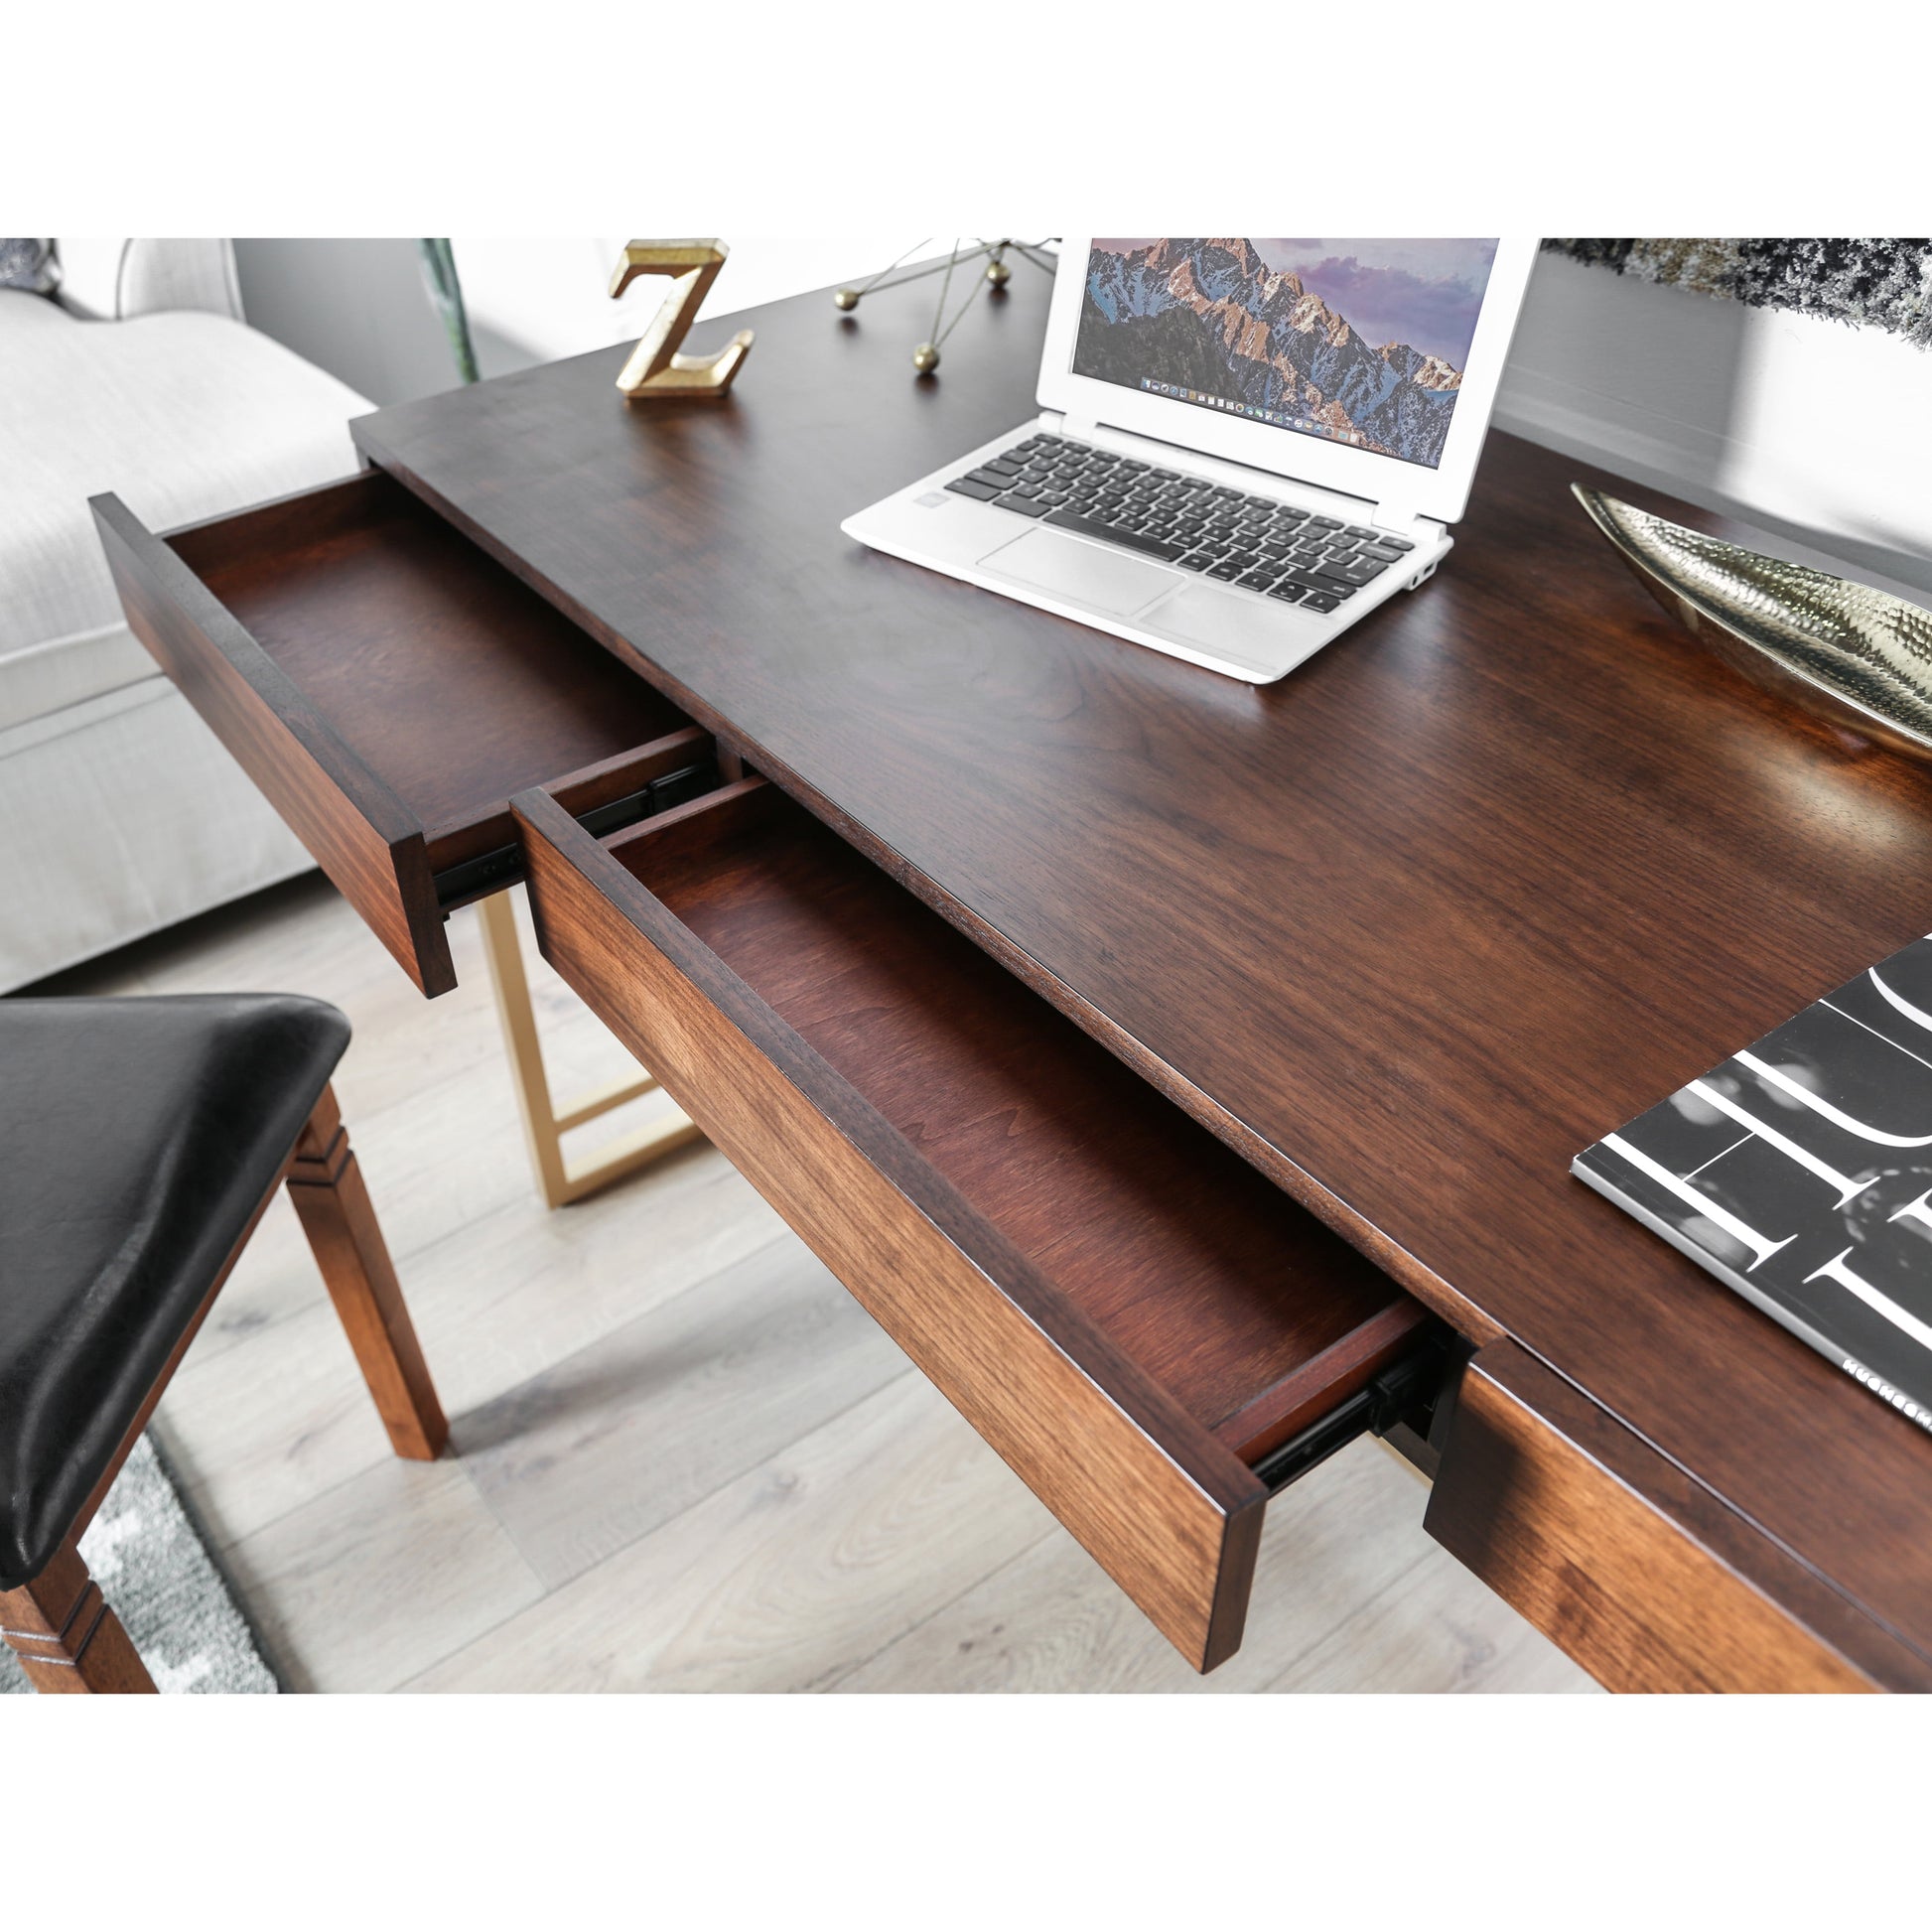 Maurice Contemporary Home Office 3-Drawer Desk in Light Walnut Wood Finish